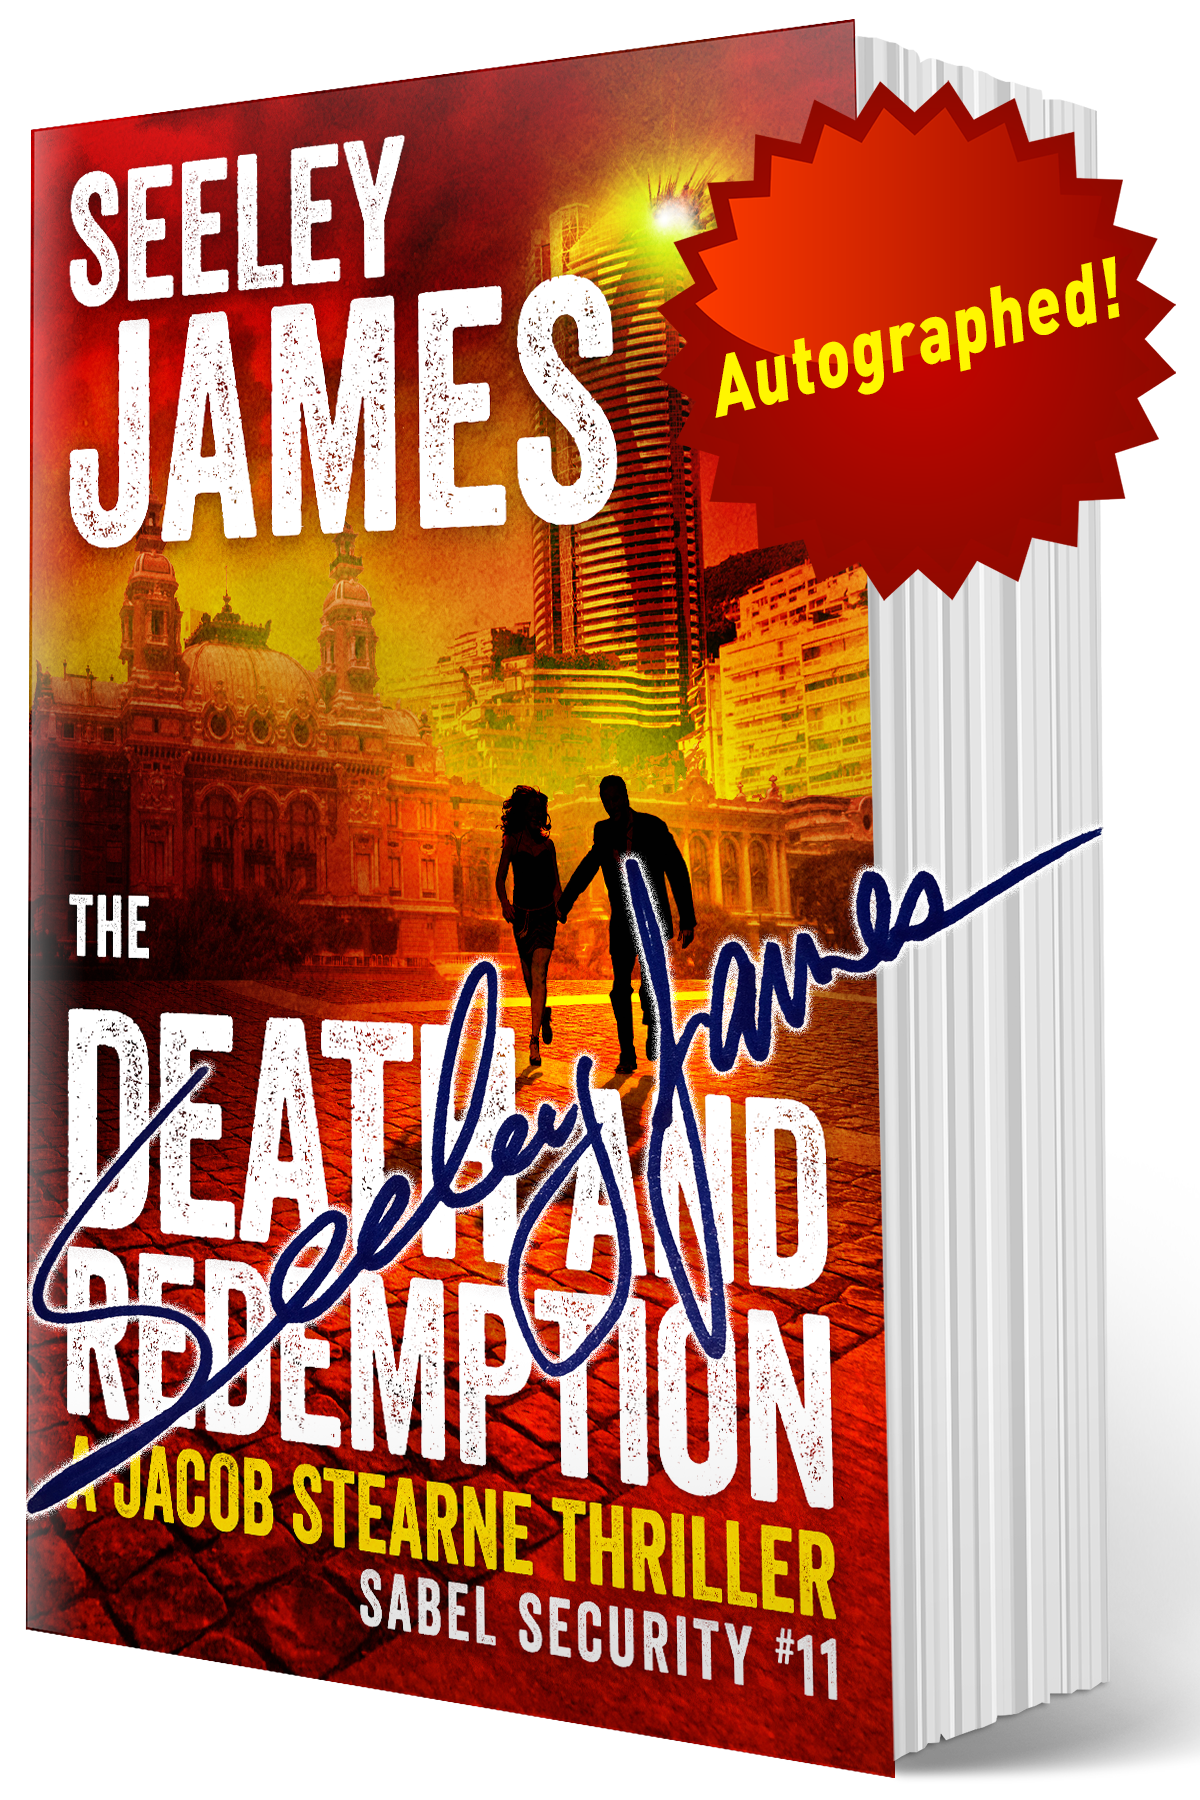 Death & Redemption: A Jacob Stearne Thriller - Softcover